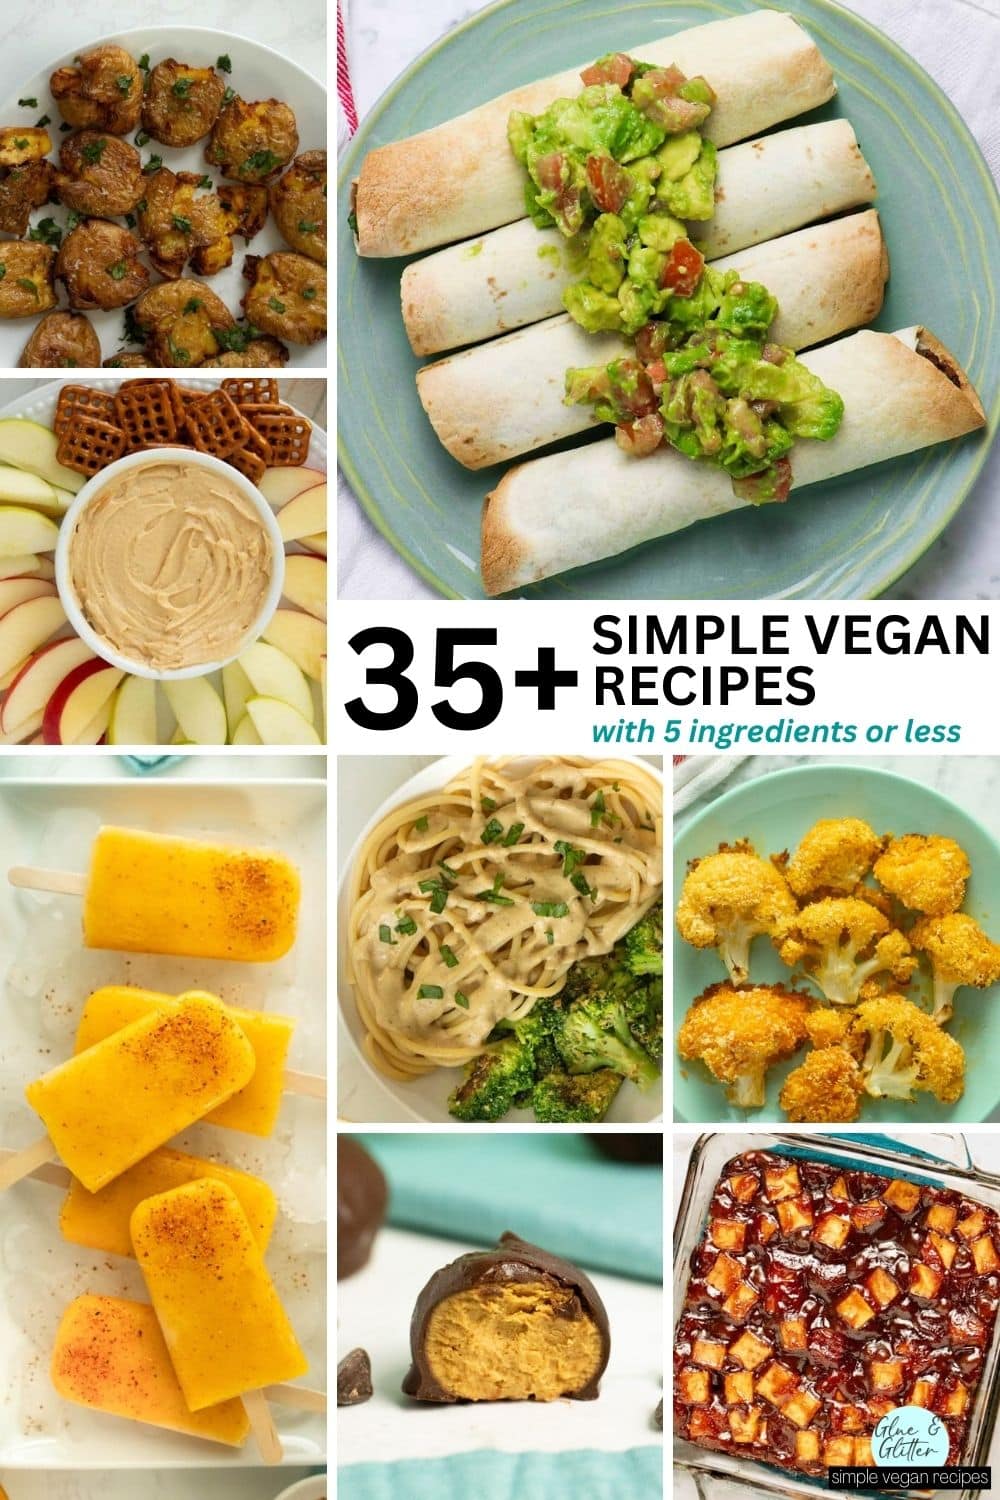 image collage showing some of the simple ingredients with 5 ingredients or less: smashed potatoes, taquitos, PB dip, pasta, popsicles, cauliflower, chocolate, and BBQ tofu